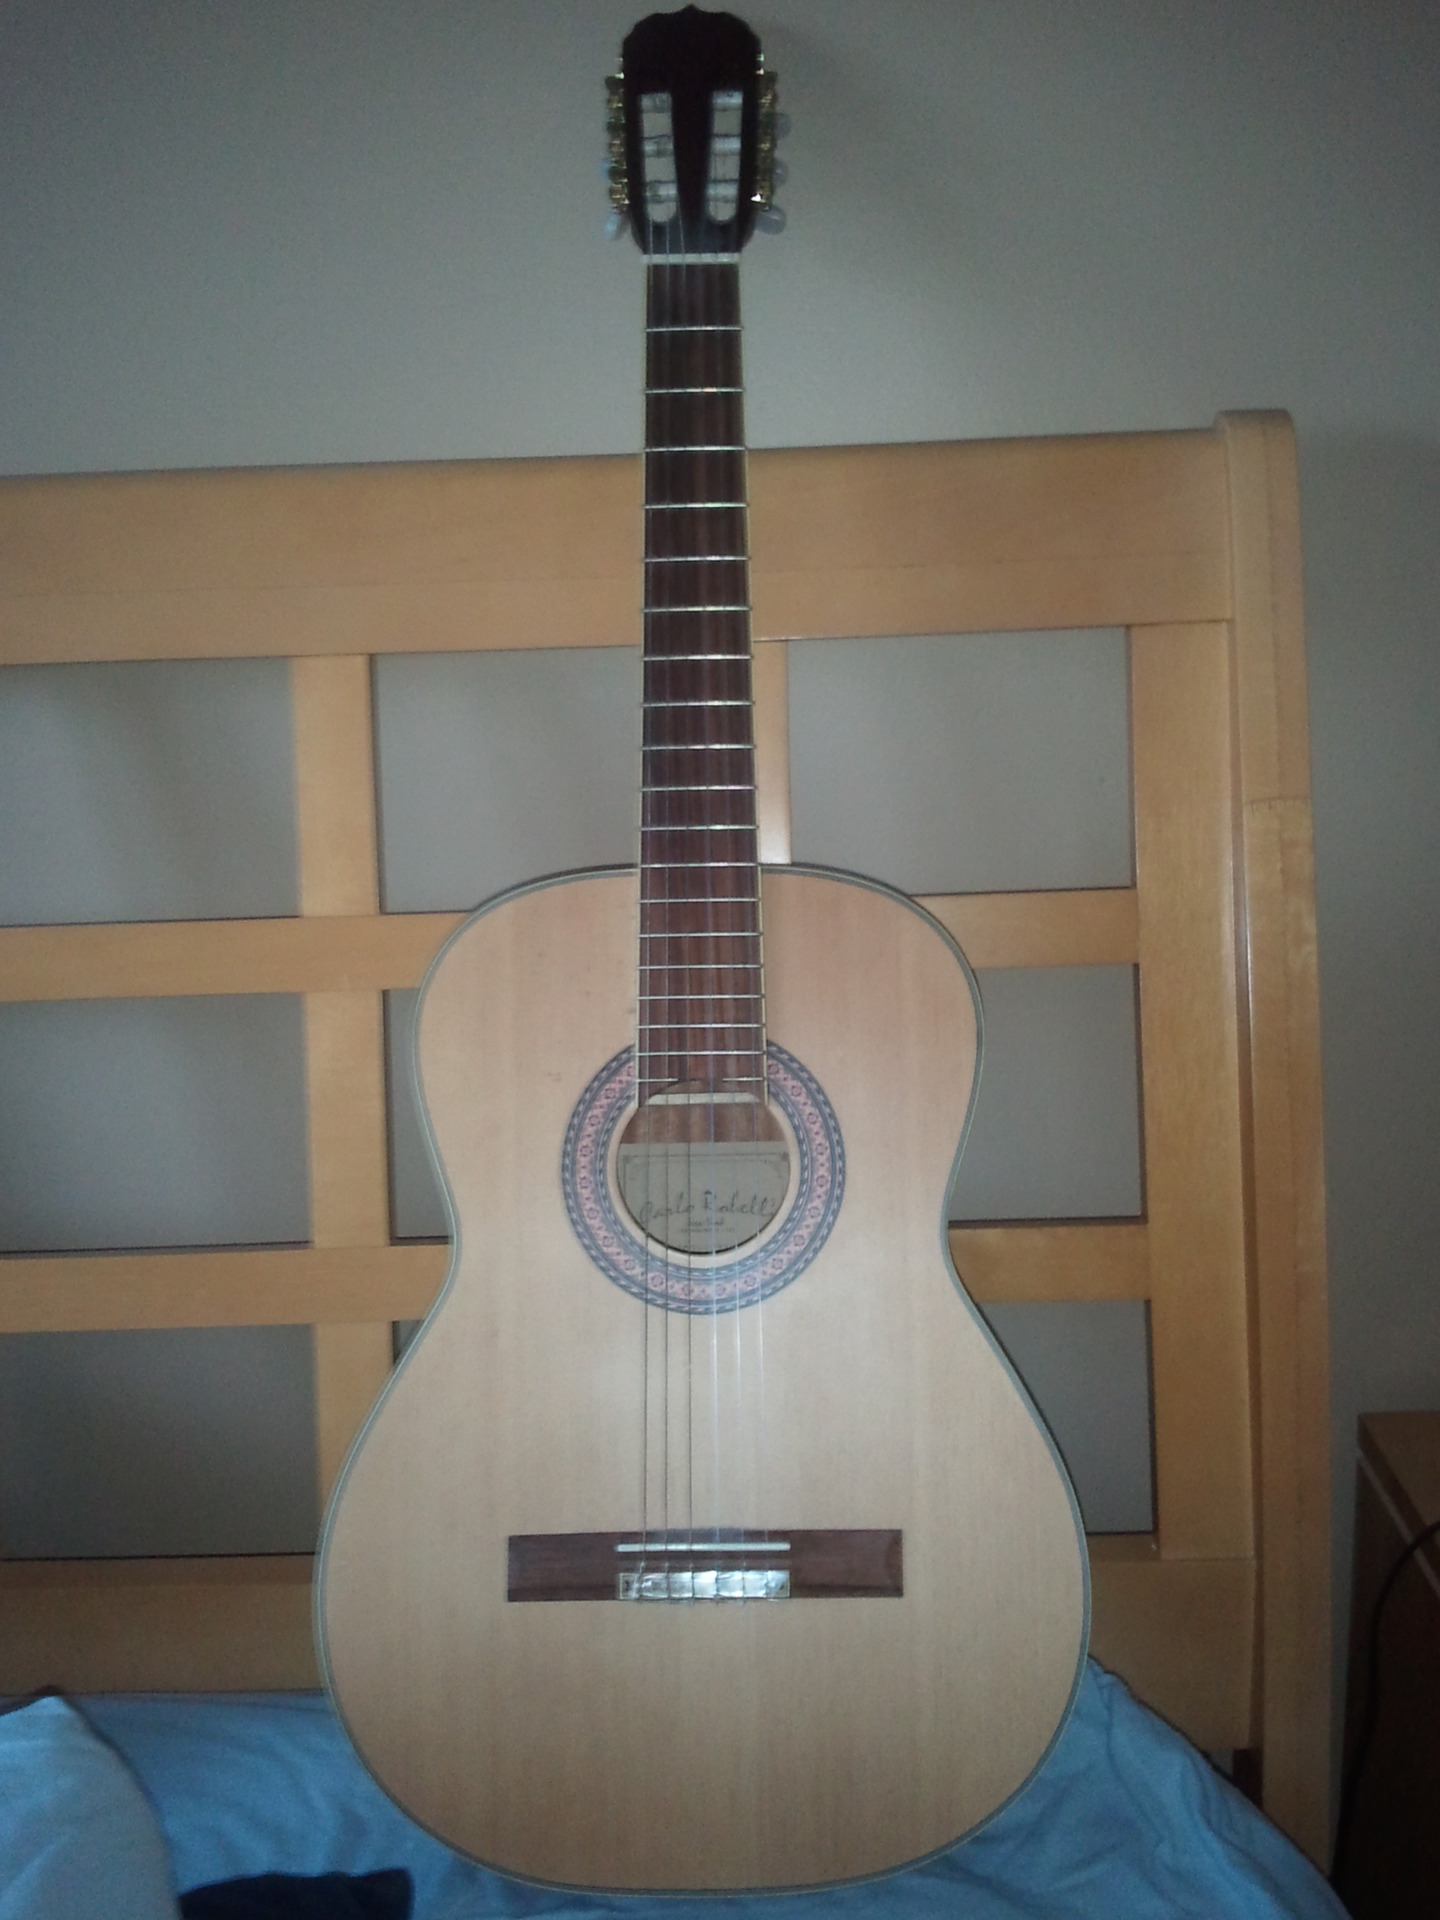  The only nylon string guitar I own.  I got it to practice classical, and now it's one of my favorites to play when I'm feeling calm.   It just feels great to play.